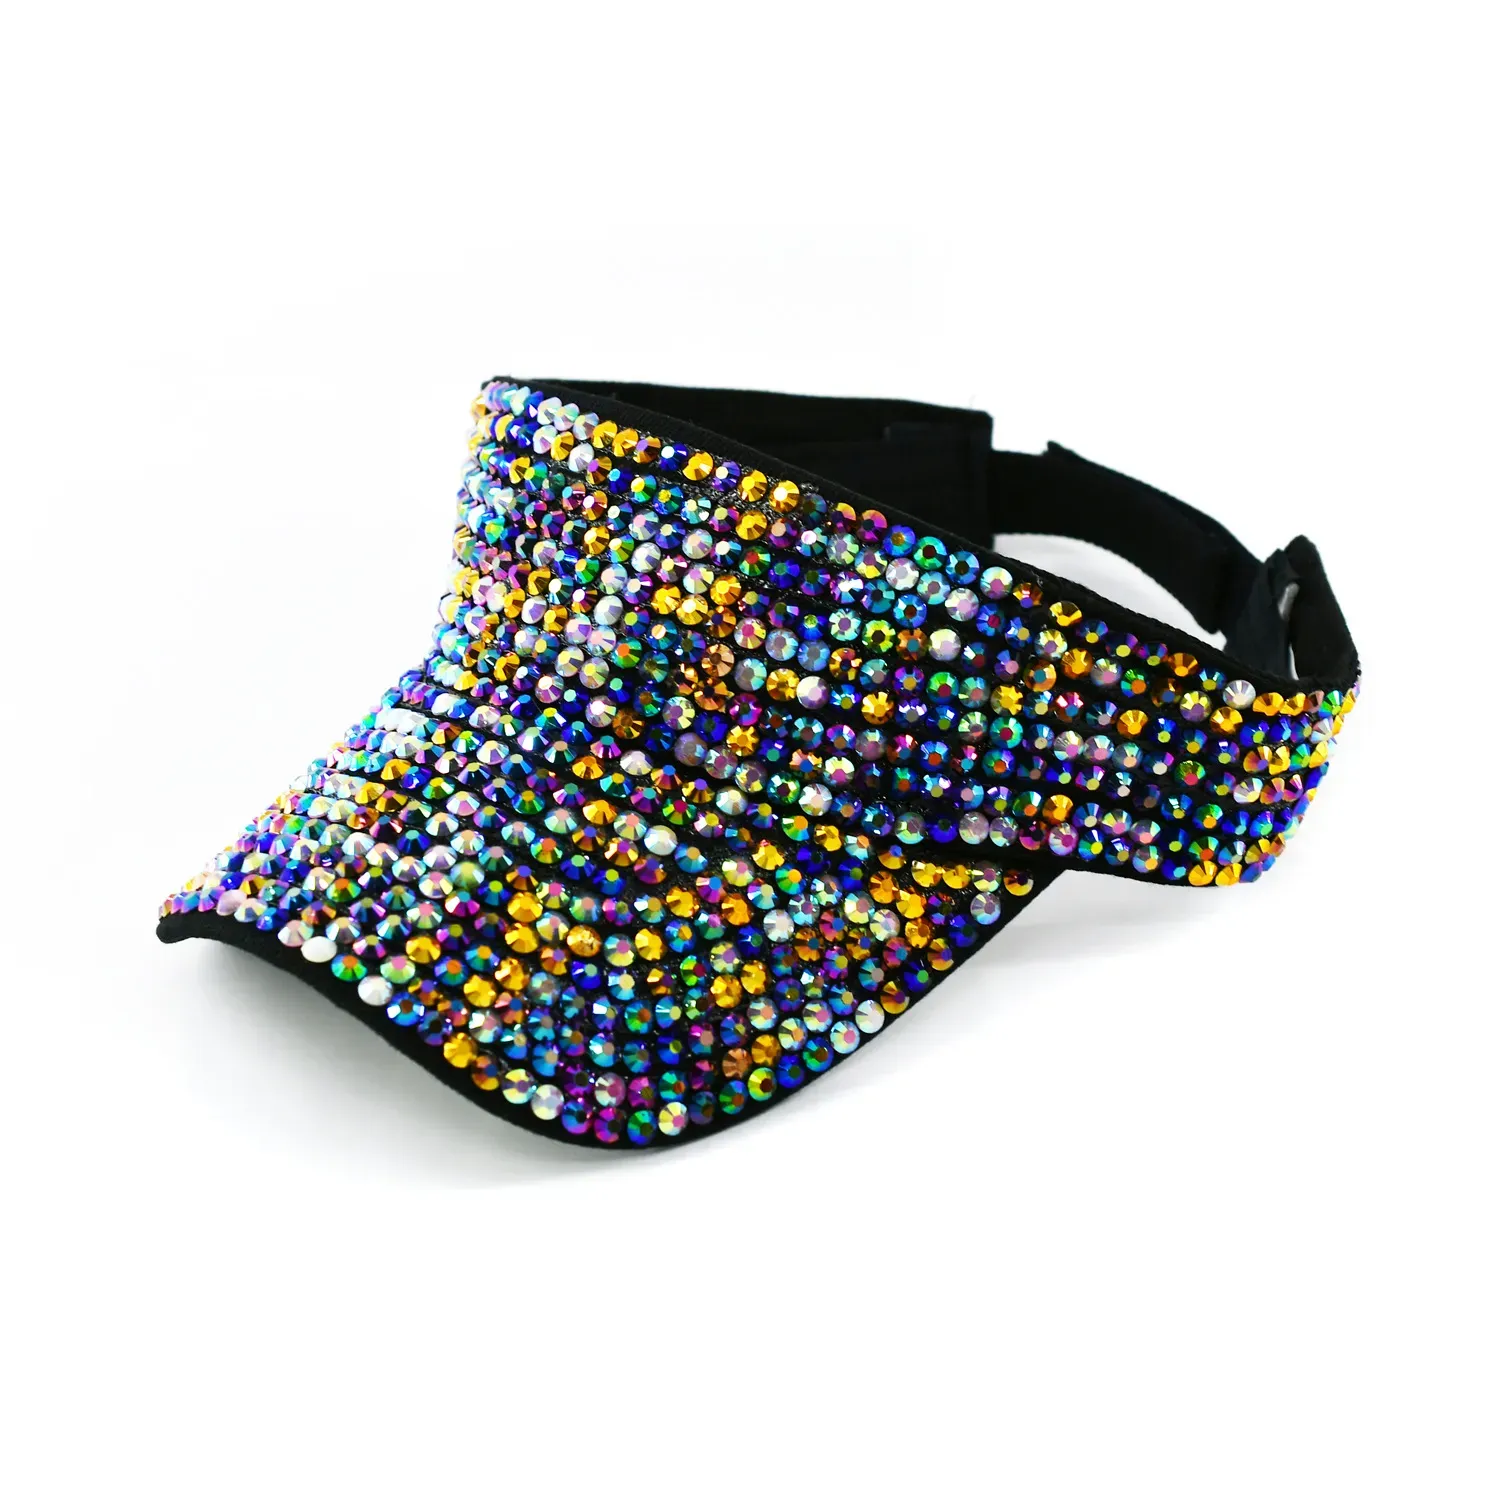 Adjustable Rhinestone Visor Hat For Women And Men Perfect For